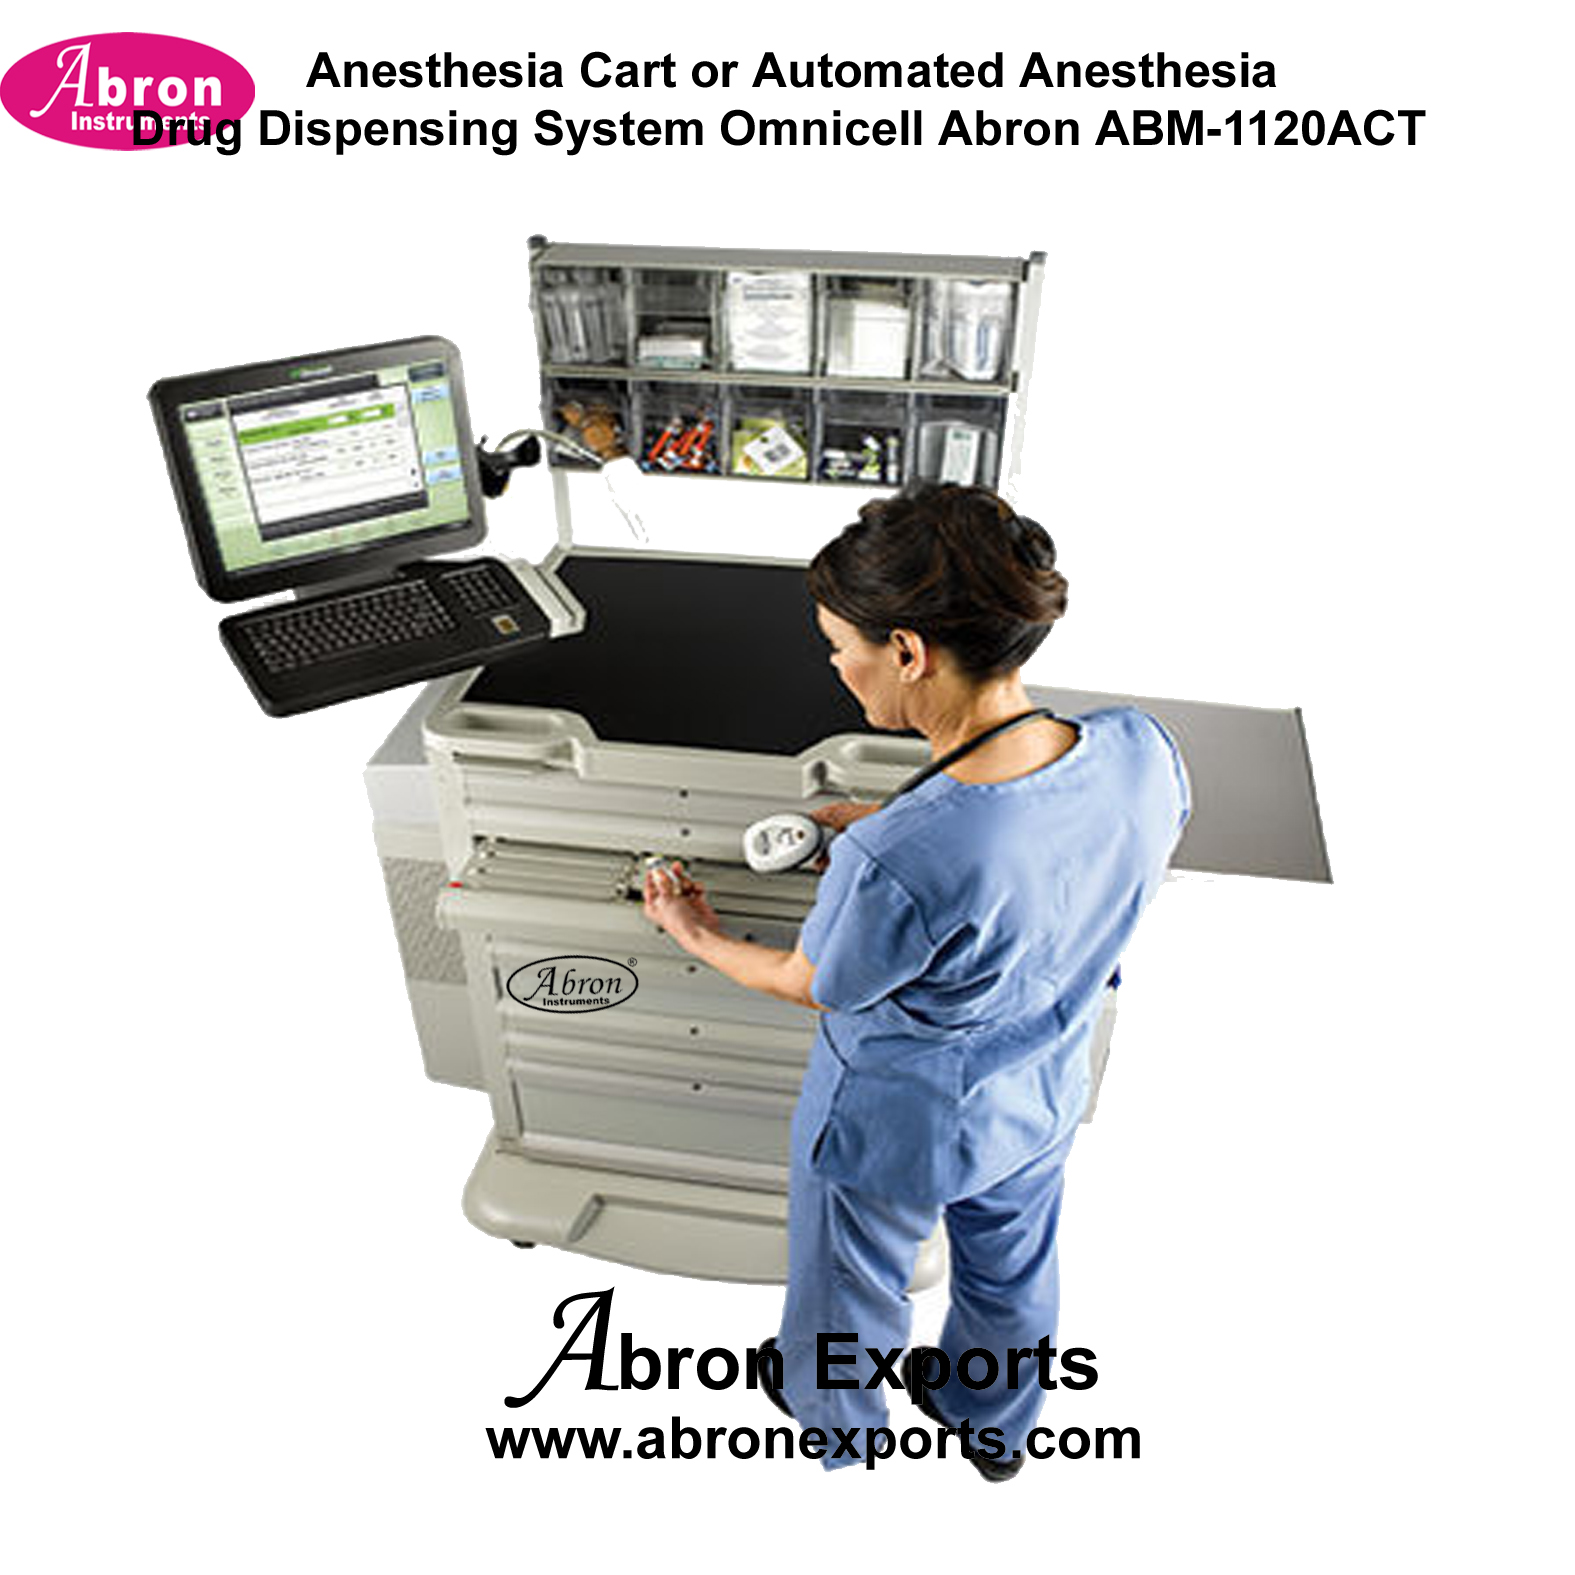 Anesthesia Cart or Automated Anesthesia Drug Dispensing System Omnicell Abron ABM-1120ACT 